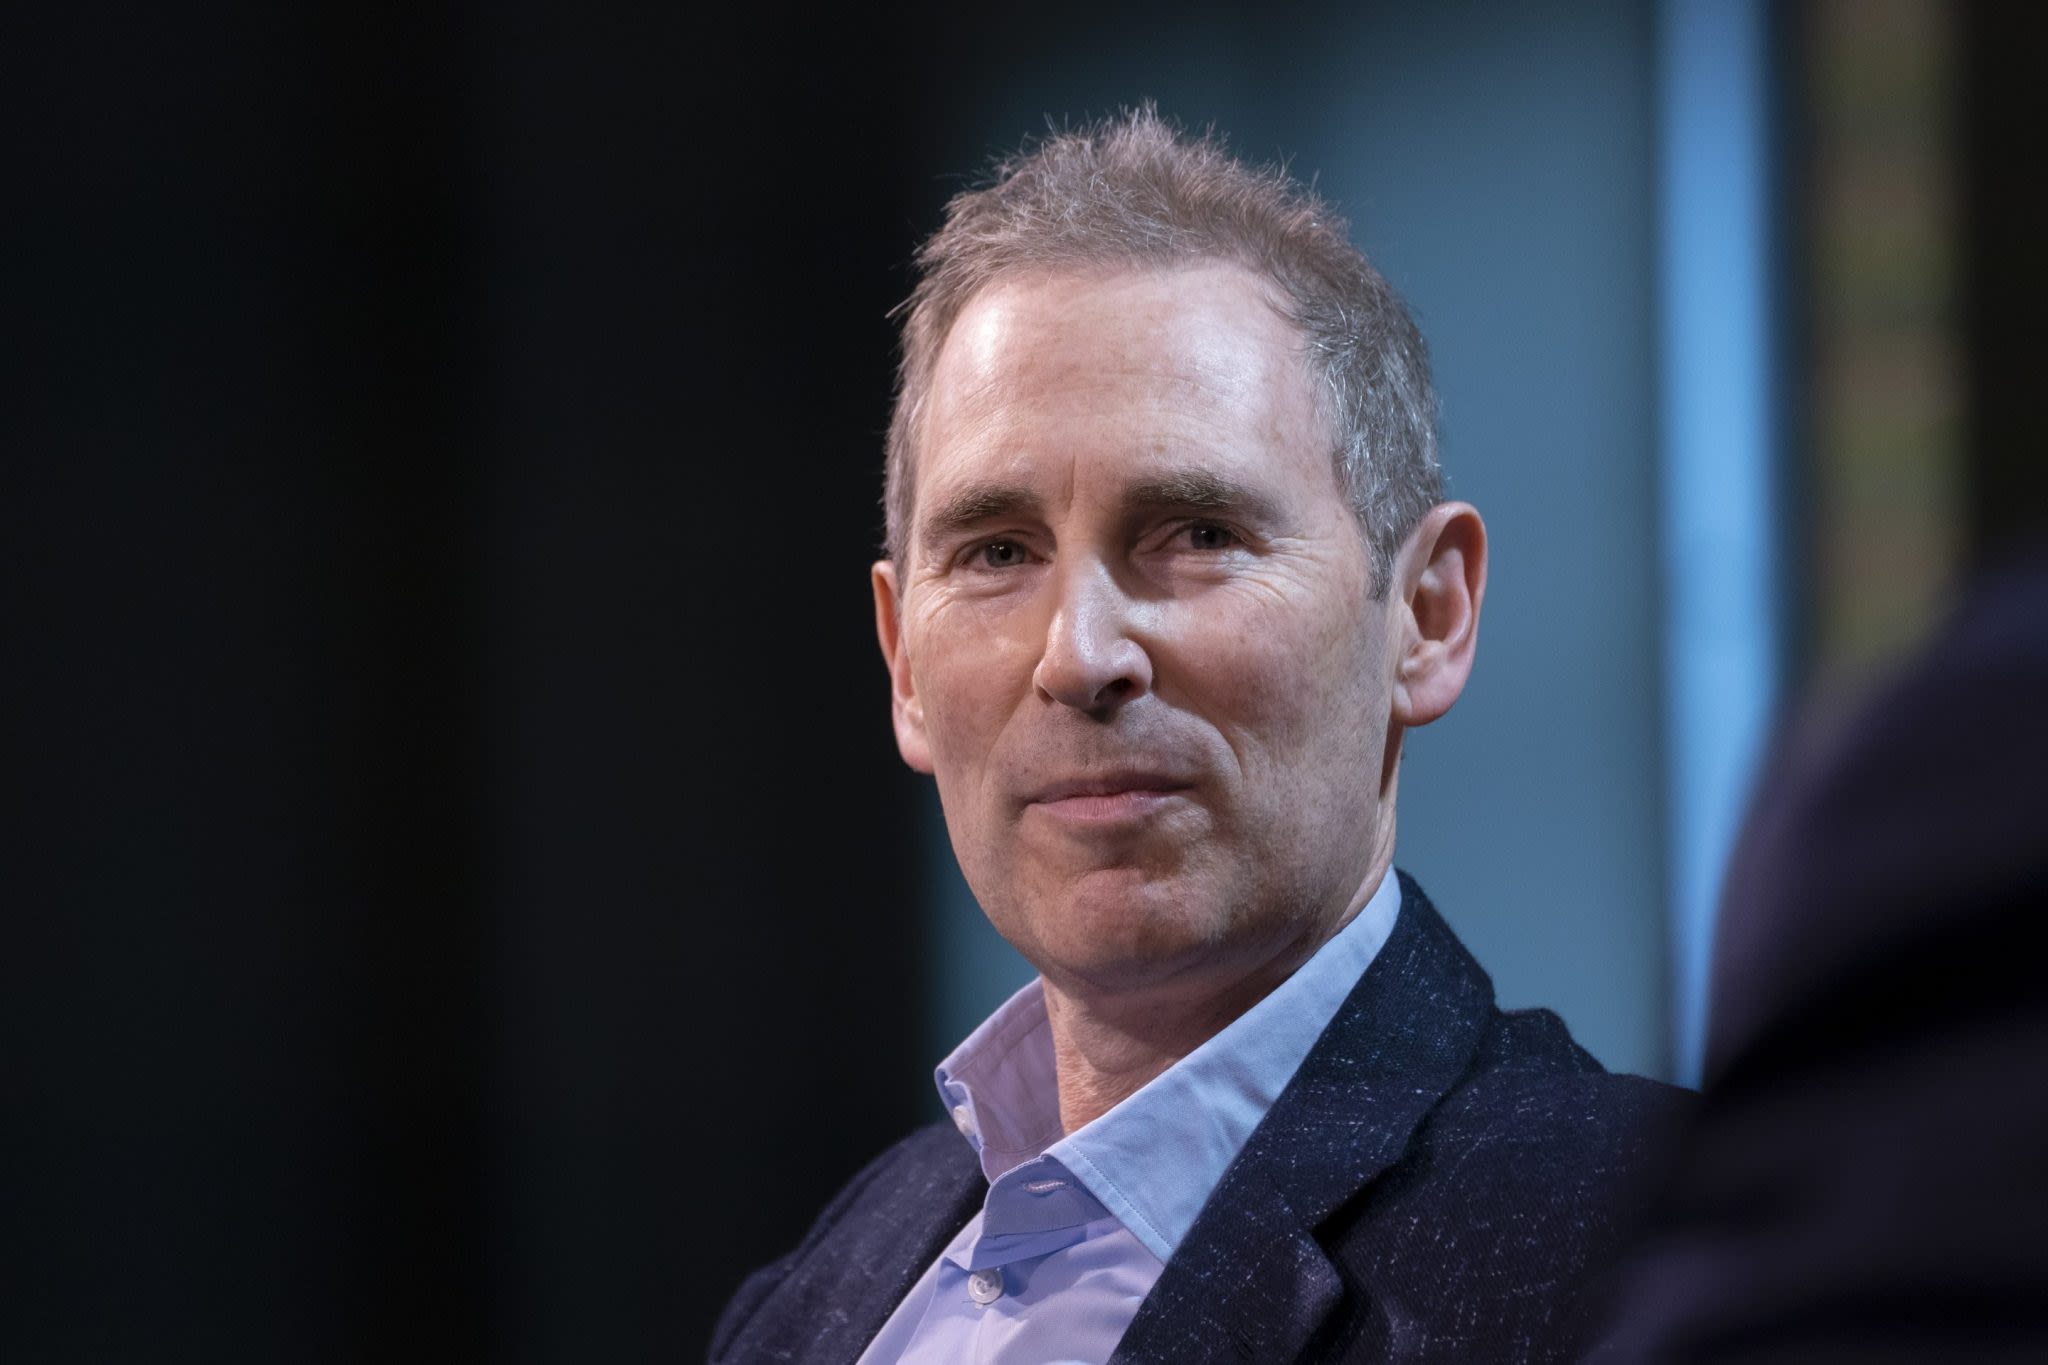 Amazon CEO Andy Jassy says you don’t have to be nice to earn trust at work